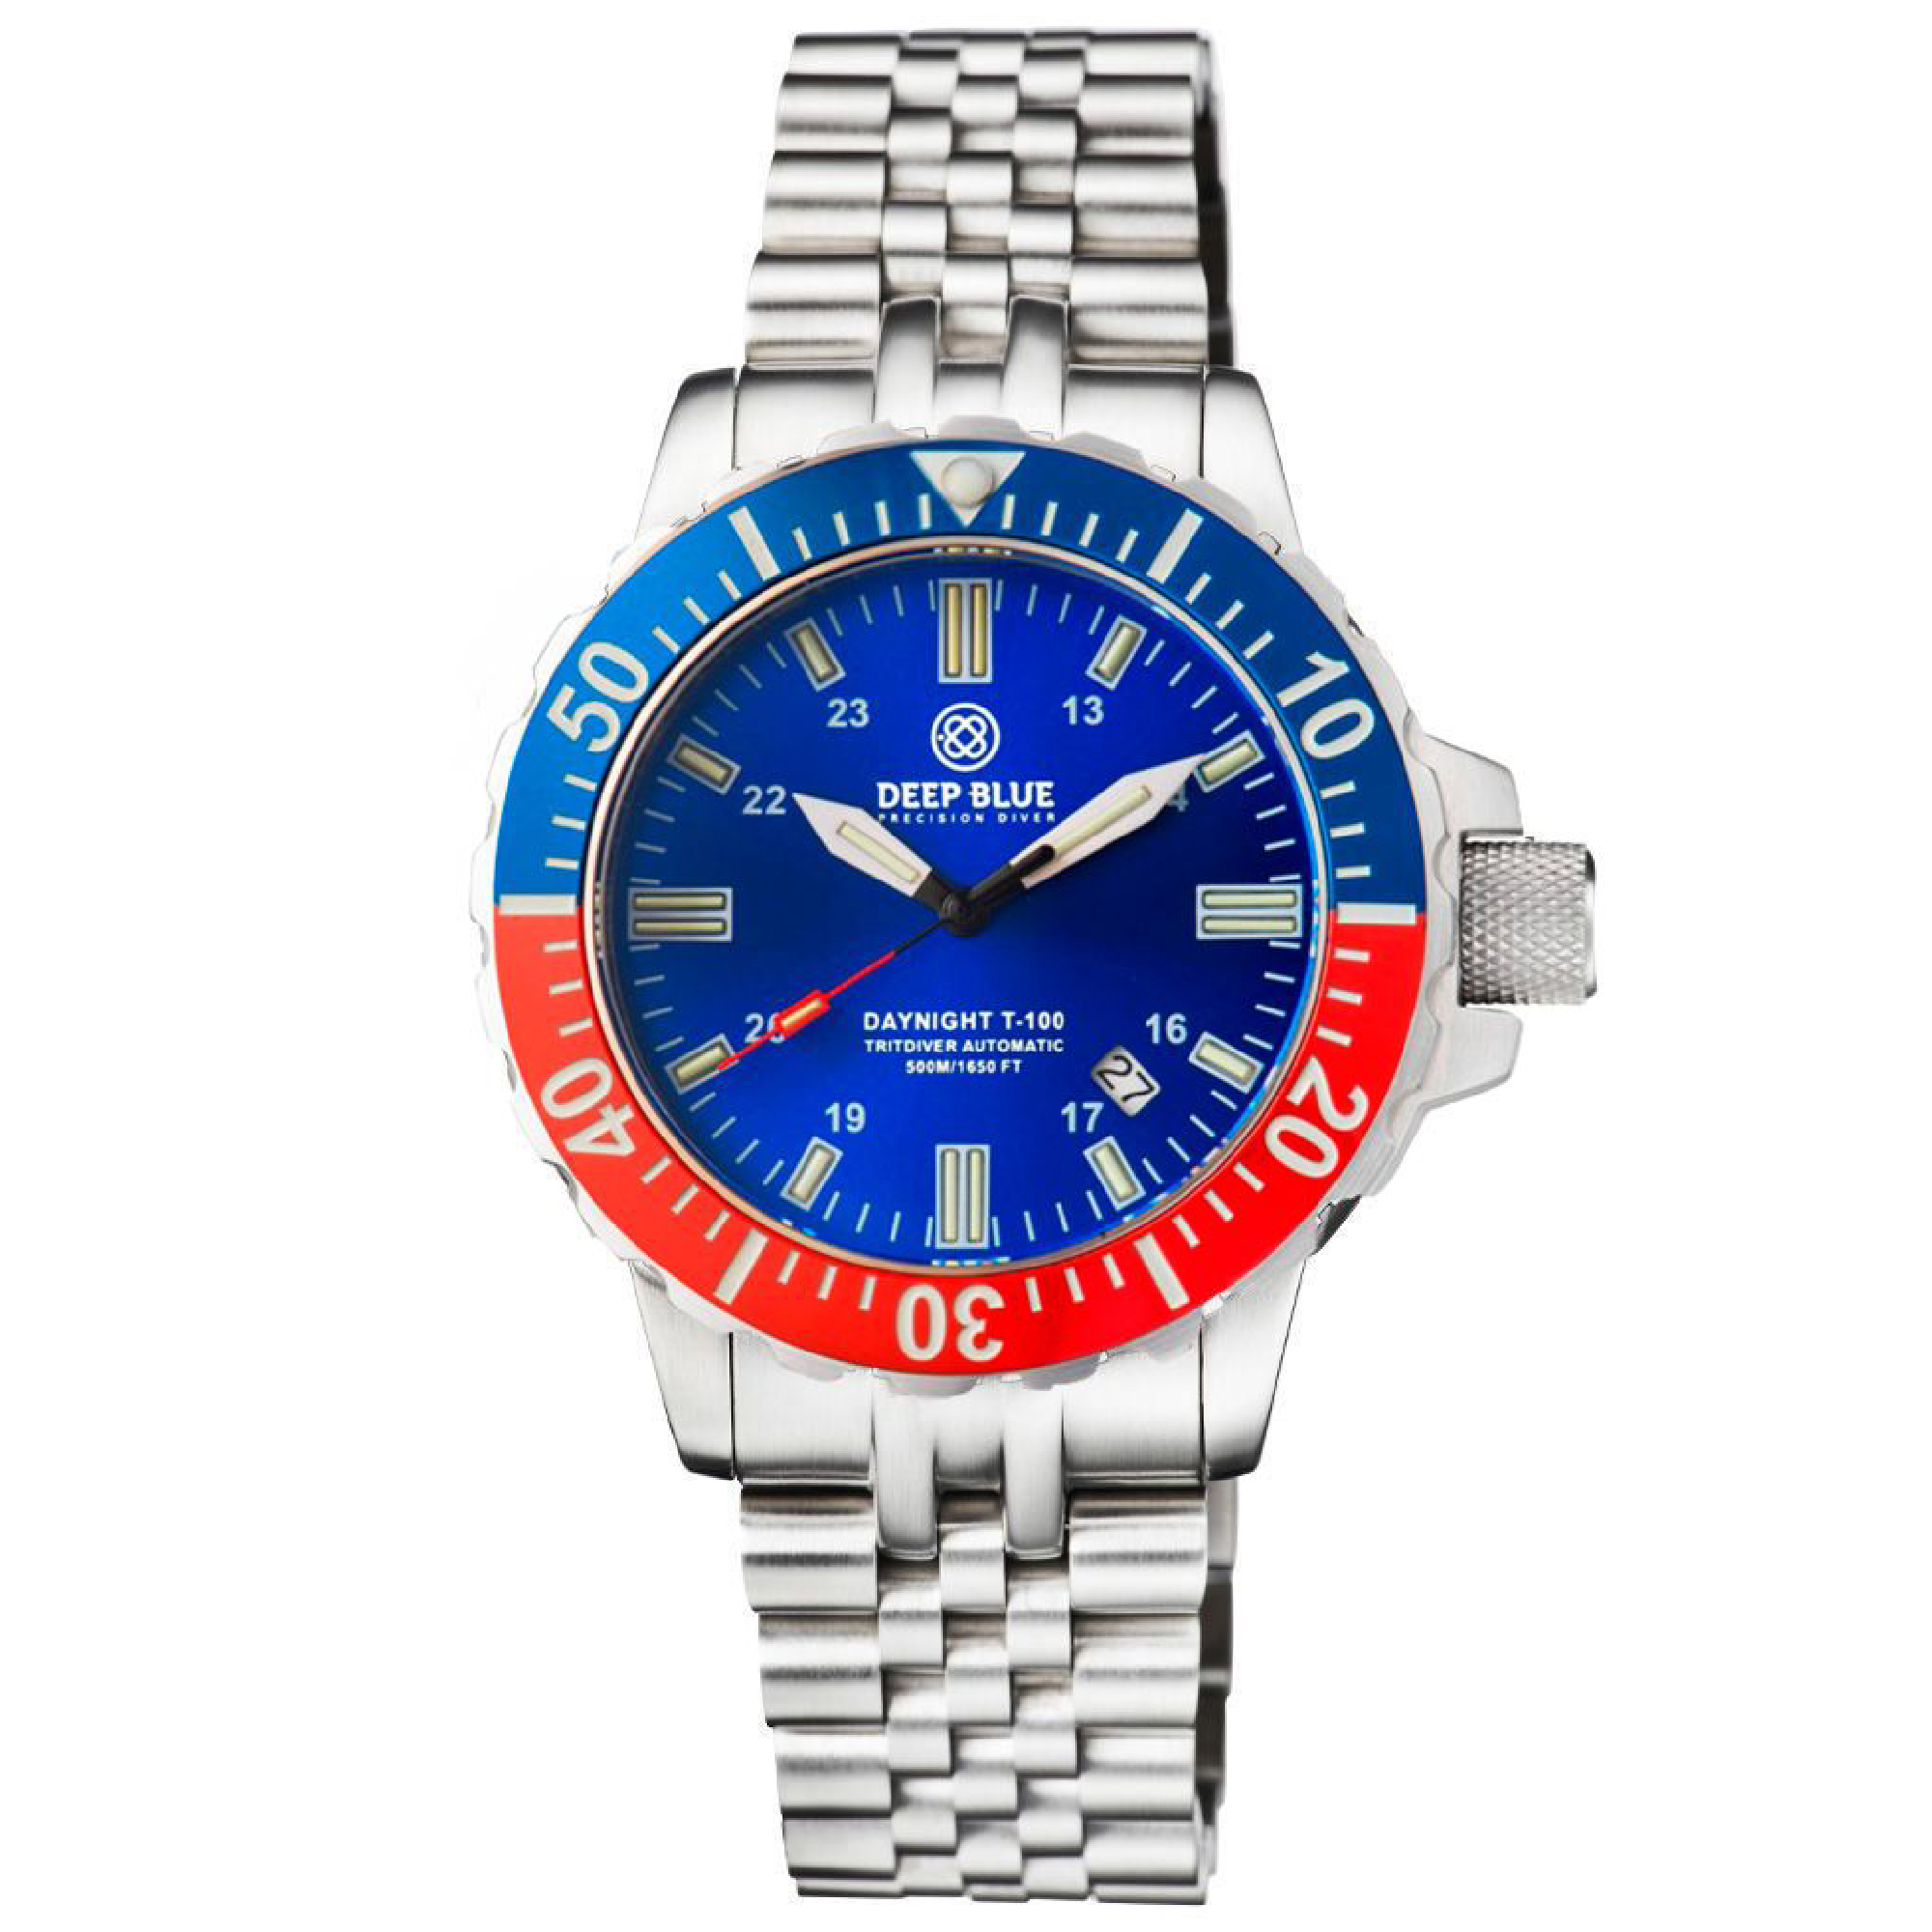 Deep Blue DayNight 41 Tritdiver T-100 Automatic Men\'s Diver Watch Blue-Red Bezel/Blue Dial